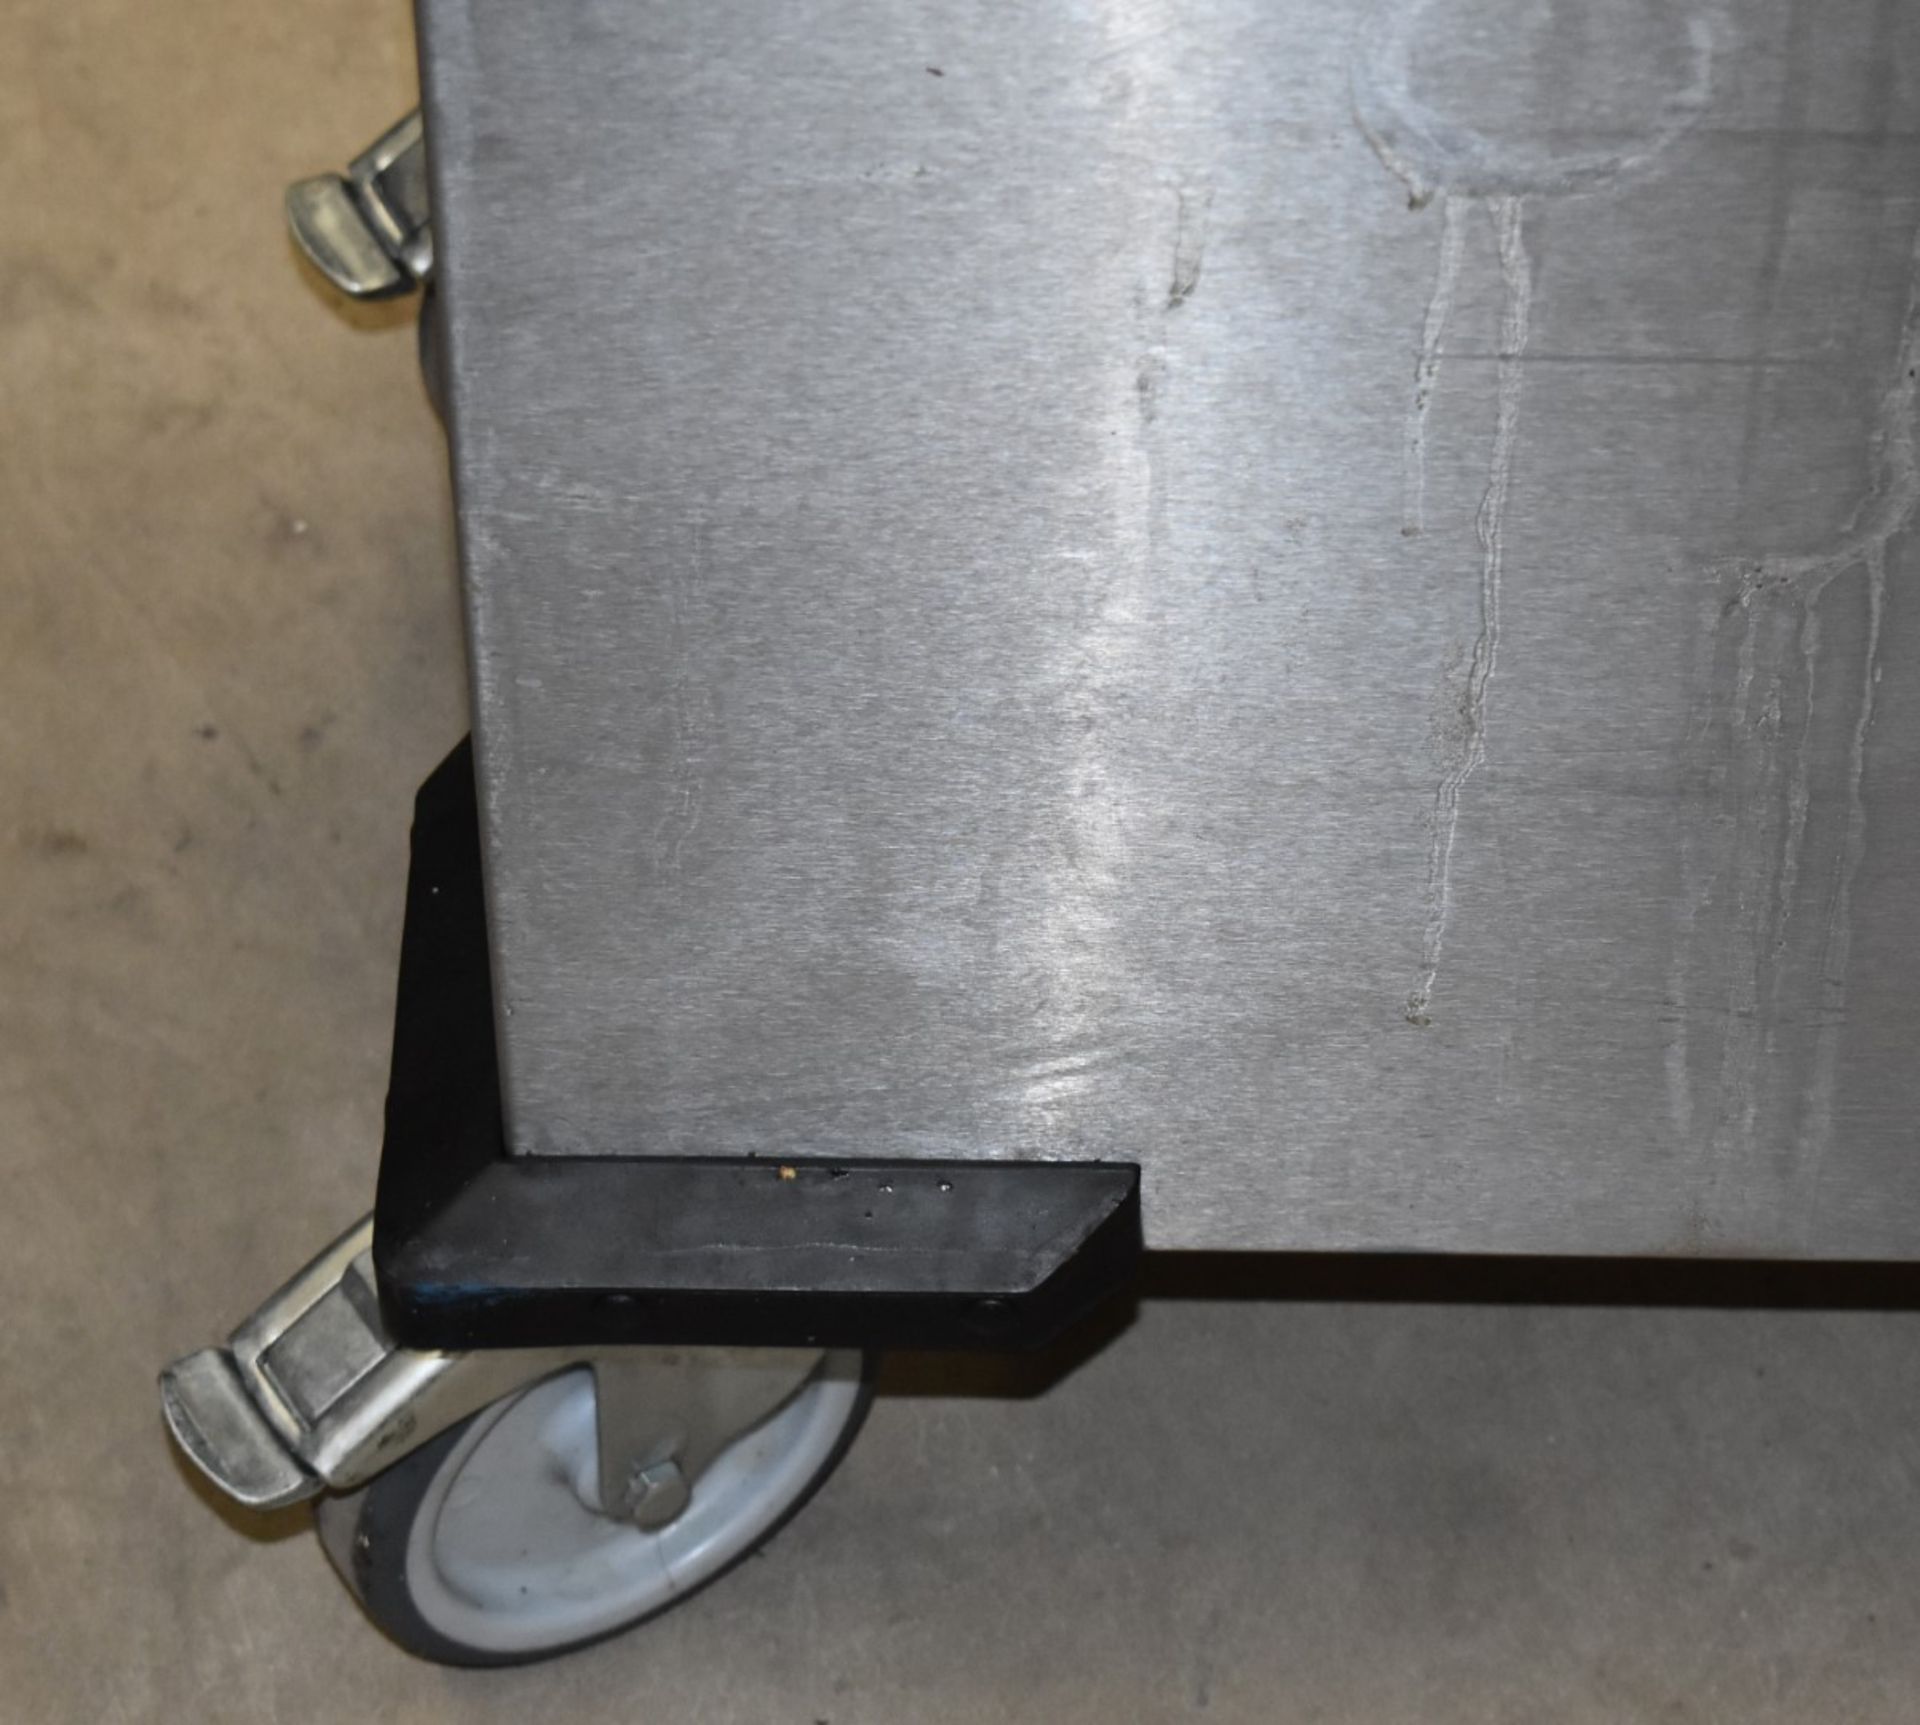 1 x Stainless Steel Twin Chamber Mobile Plate Warmer With Push Bar - Model THN-MS 280 - 280 Plate - Image 7 of 7